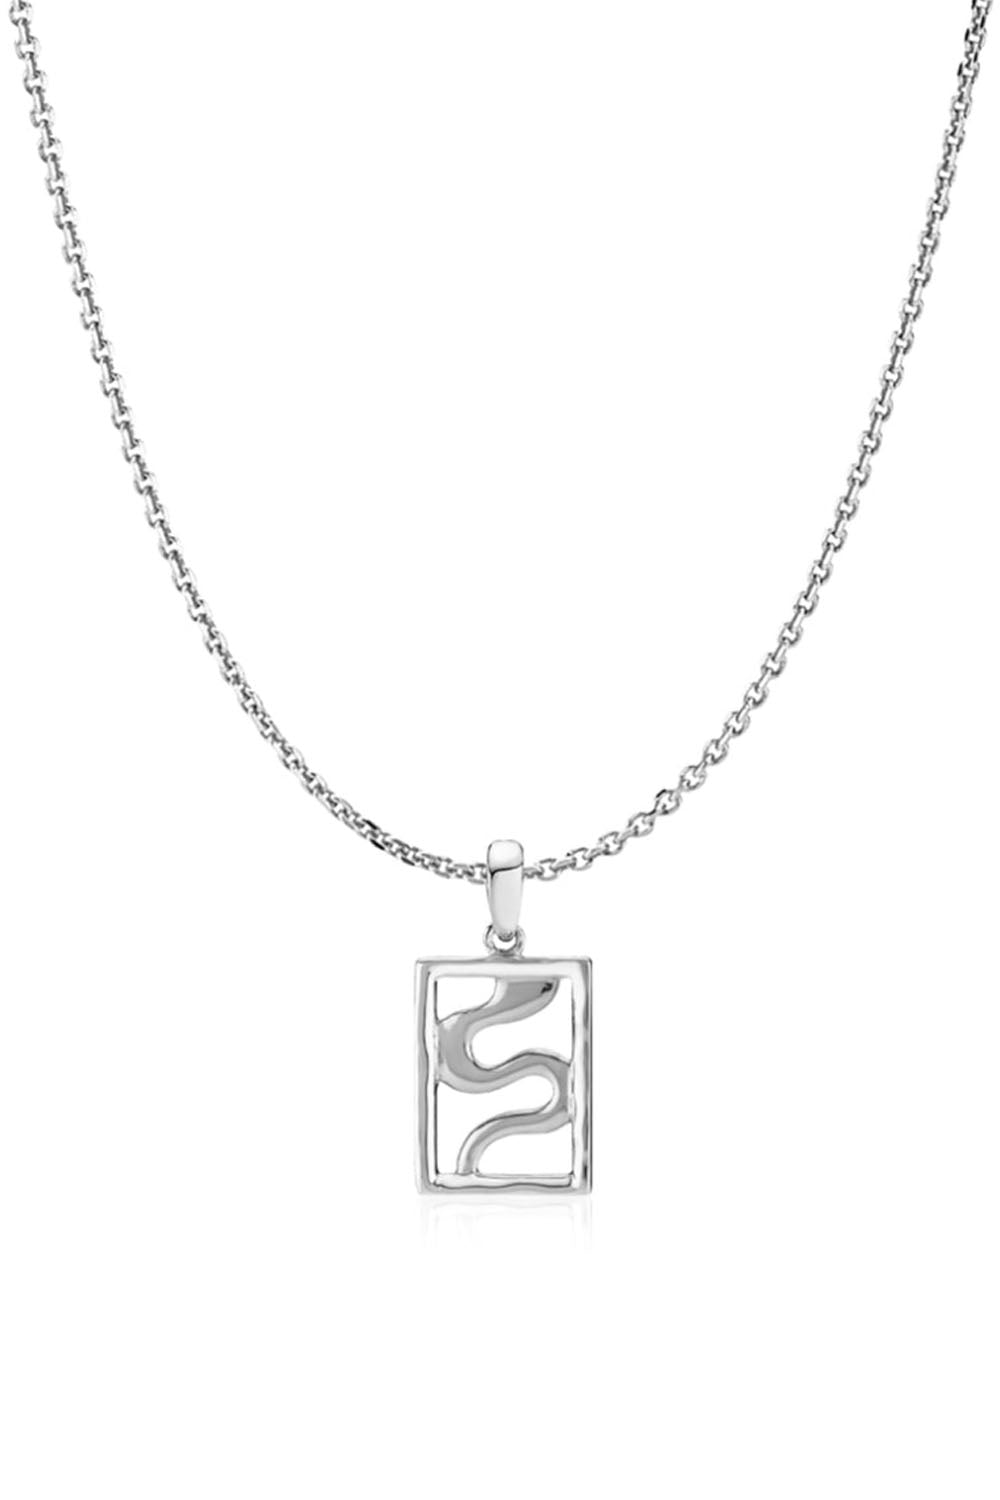 Kathrine Fisker X Sistie Chain with Pendant Silver